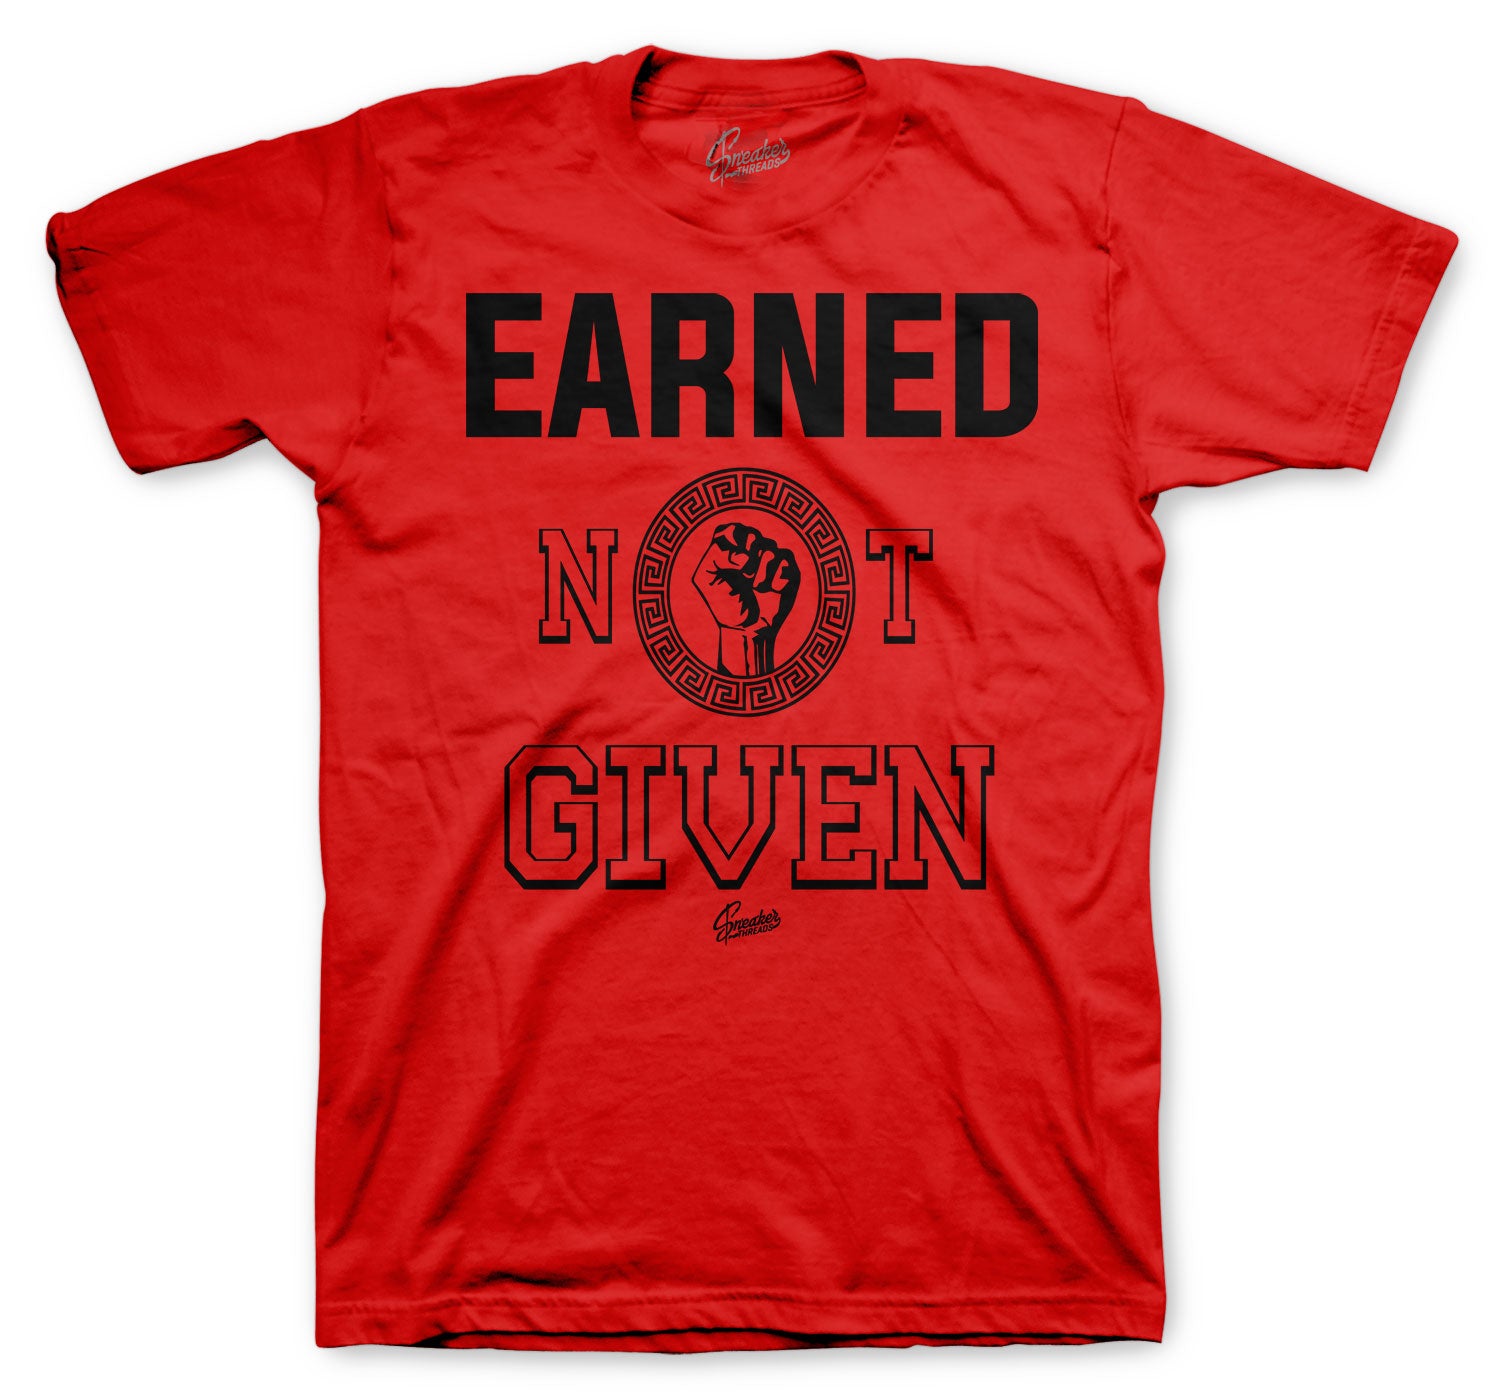 T shirts for men to match the Jordan 12 reverse flu game sneaker collection 